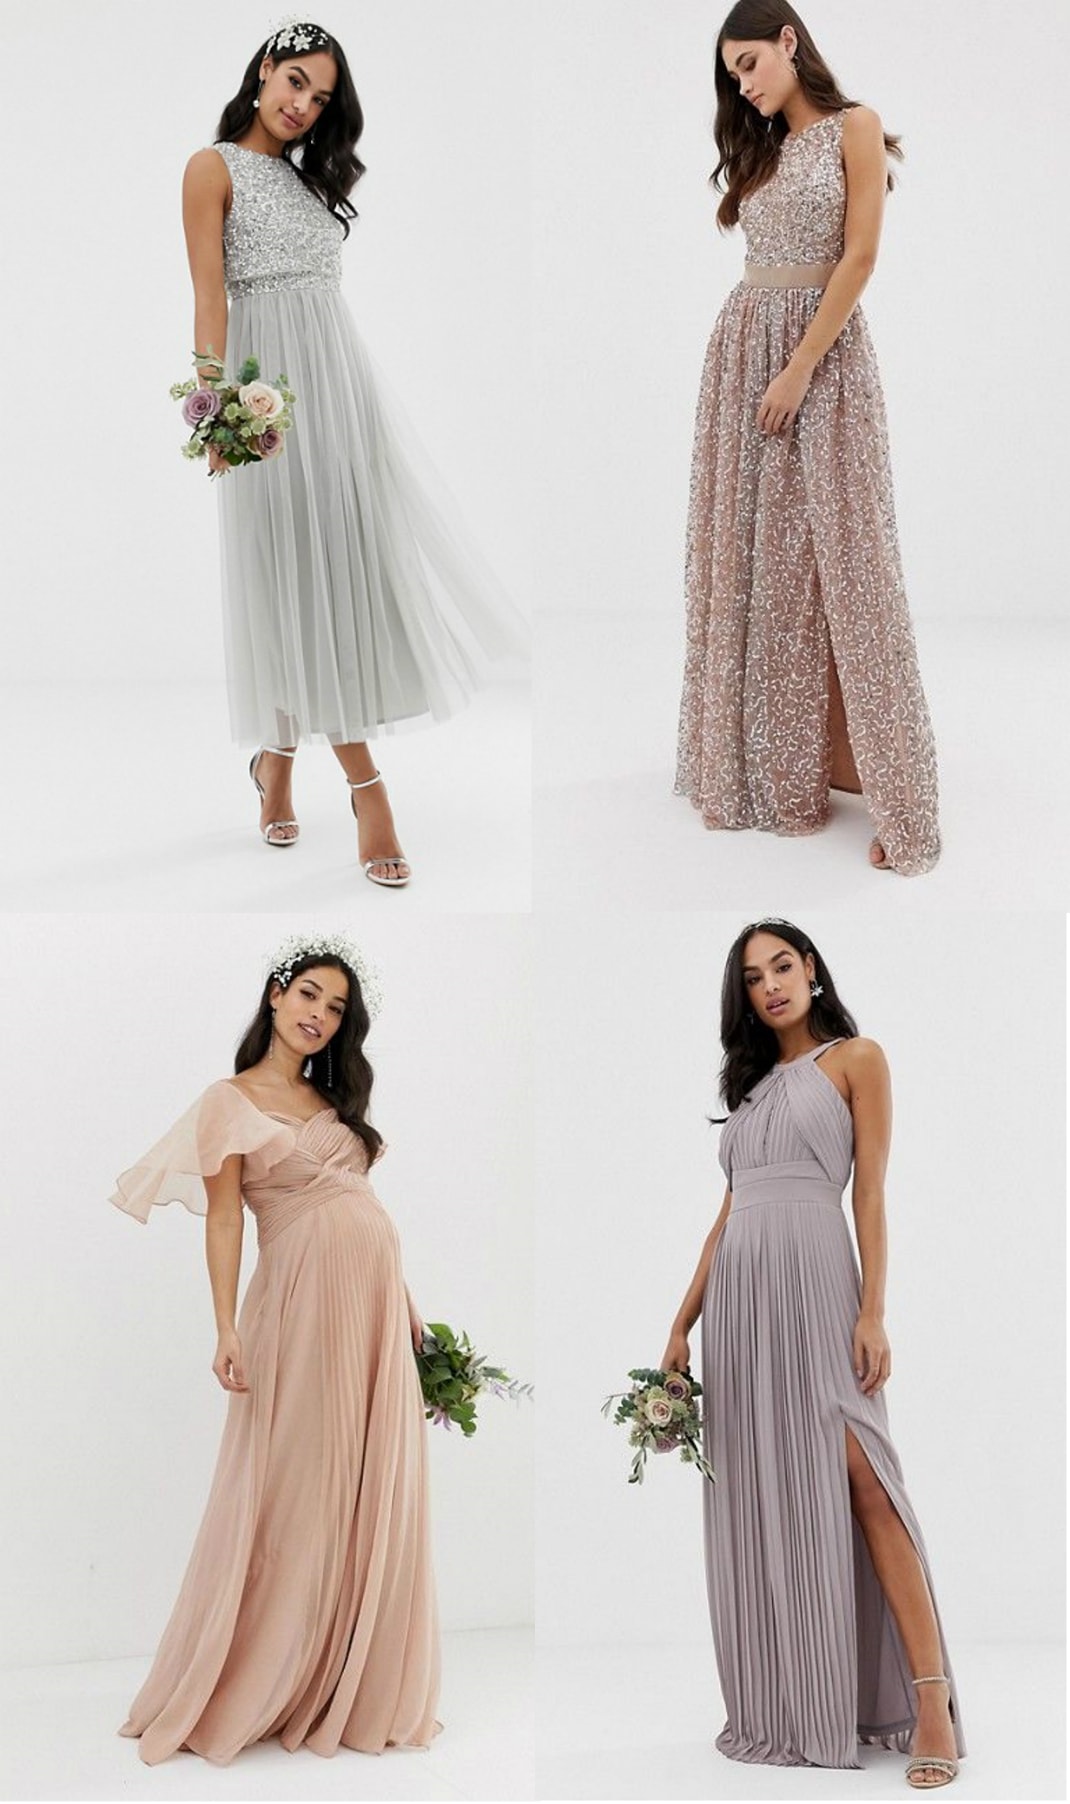 New Bridesmaid Dresses from ASOS - Dress for the Wedding